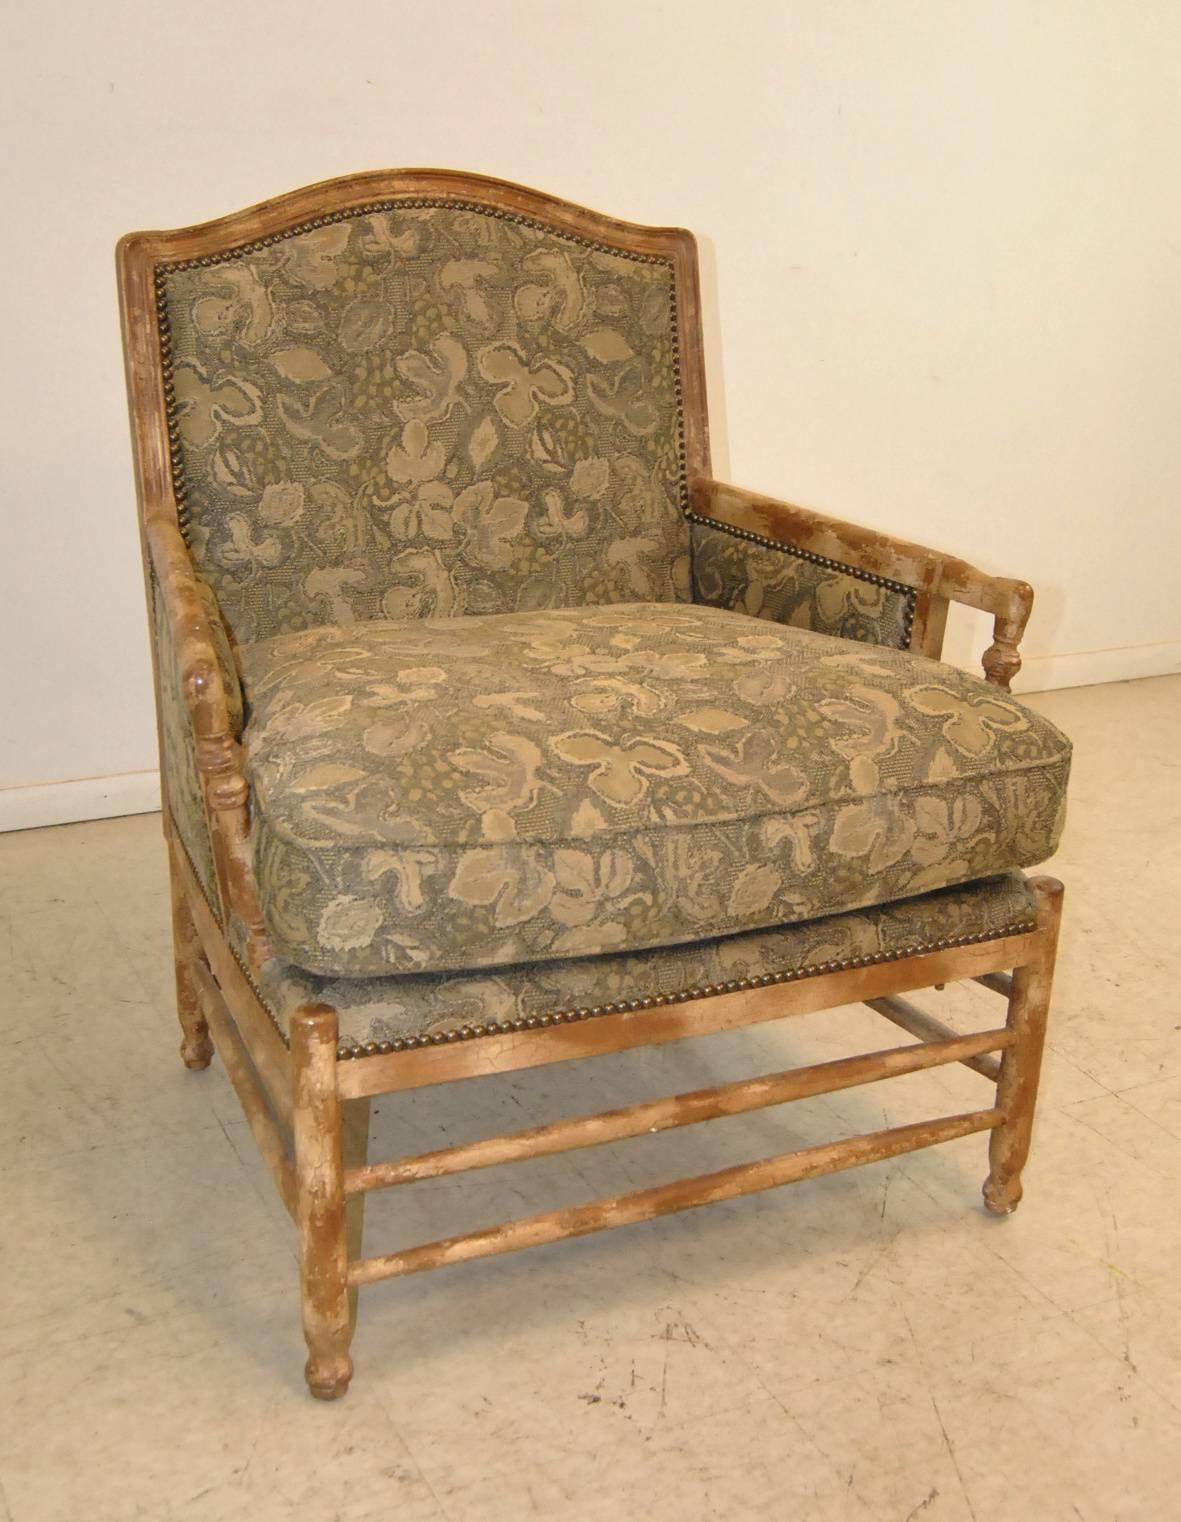 A unique French country Bergere style armchair by Isenhour Furniture. The chair is upholstered in a rich taupe cloth with tone on tone grape vine pattern (a match to a Baker Sofa we have listed separately). The chair features a distressed lime